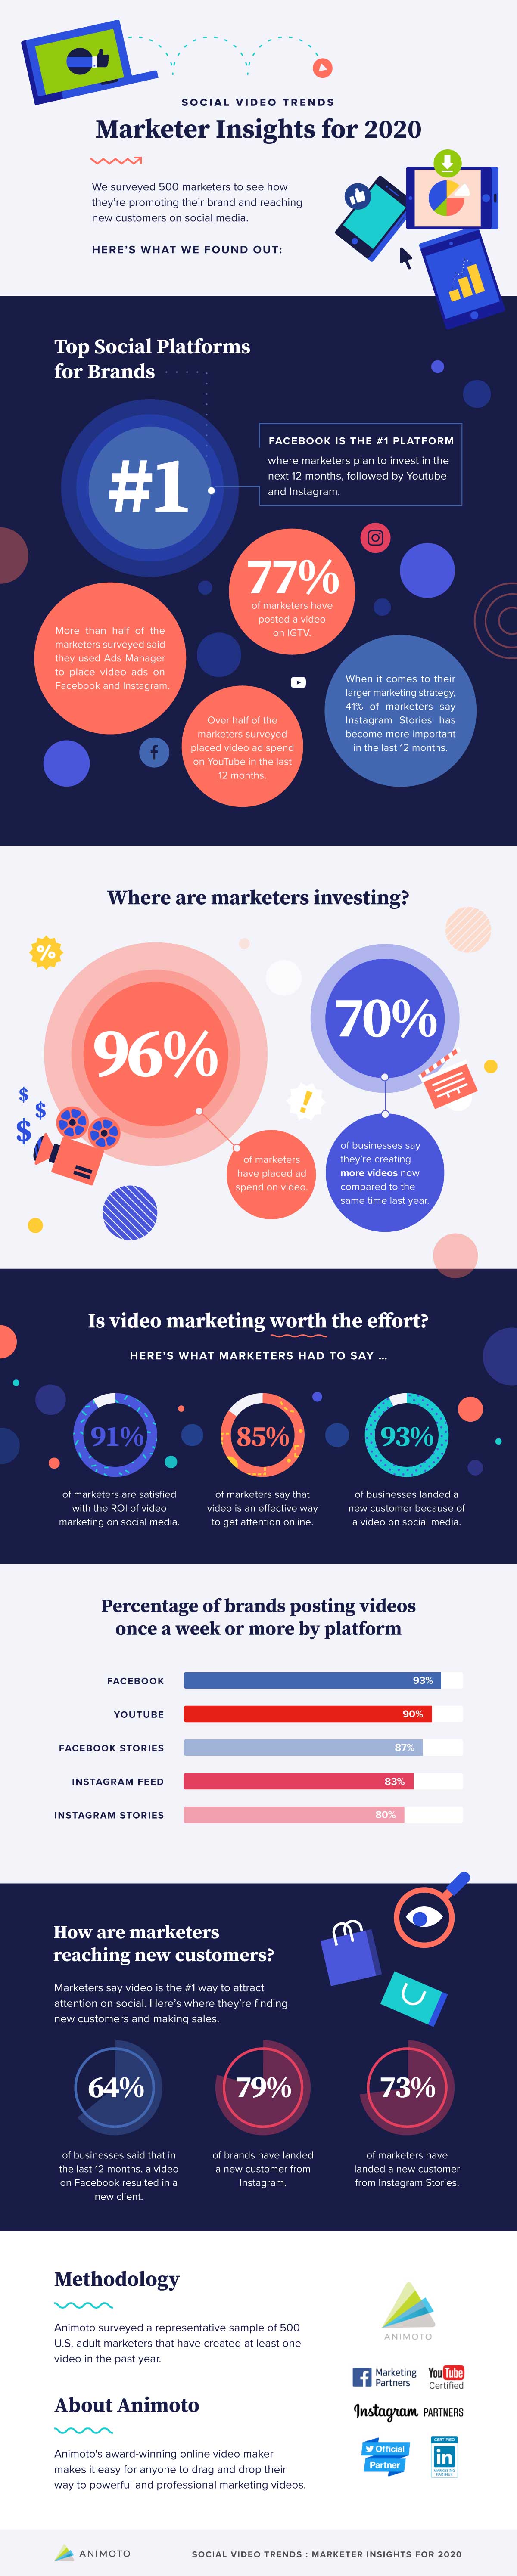 Social Video Trends Marketer Insights for 2020 Infographic